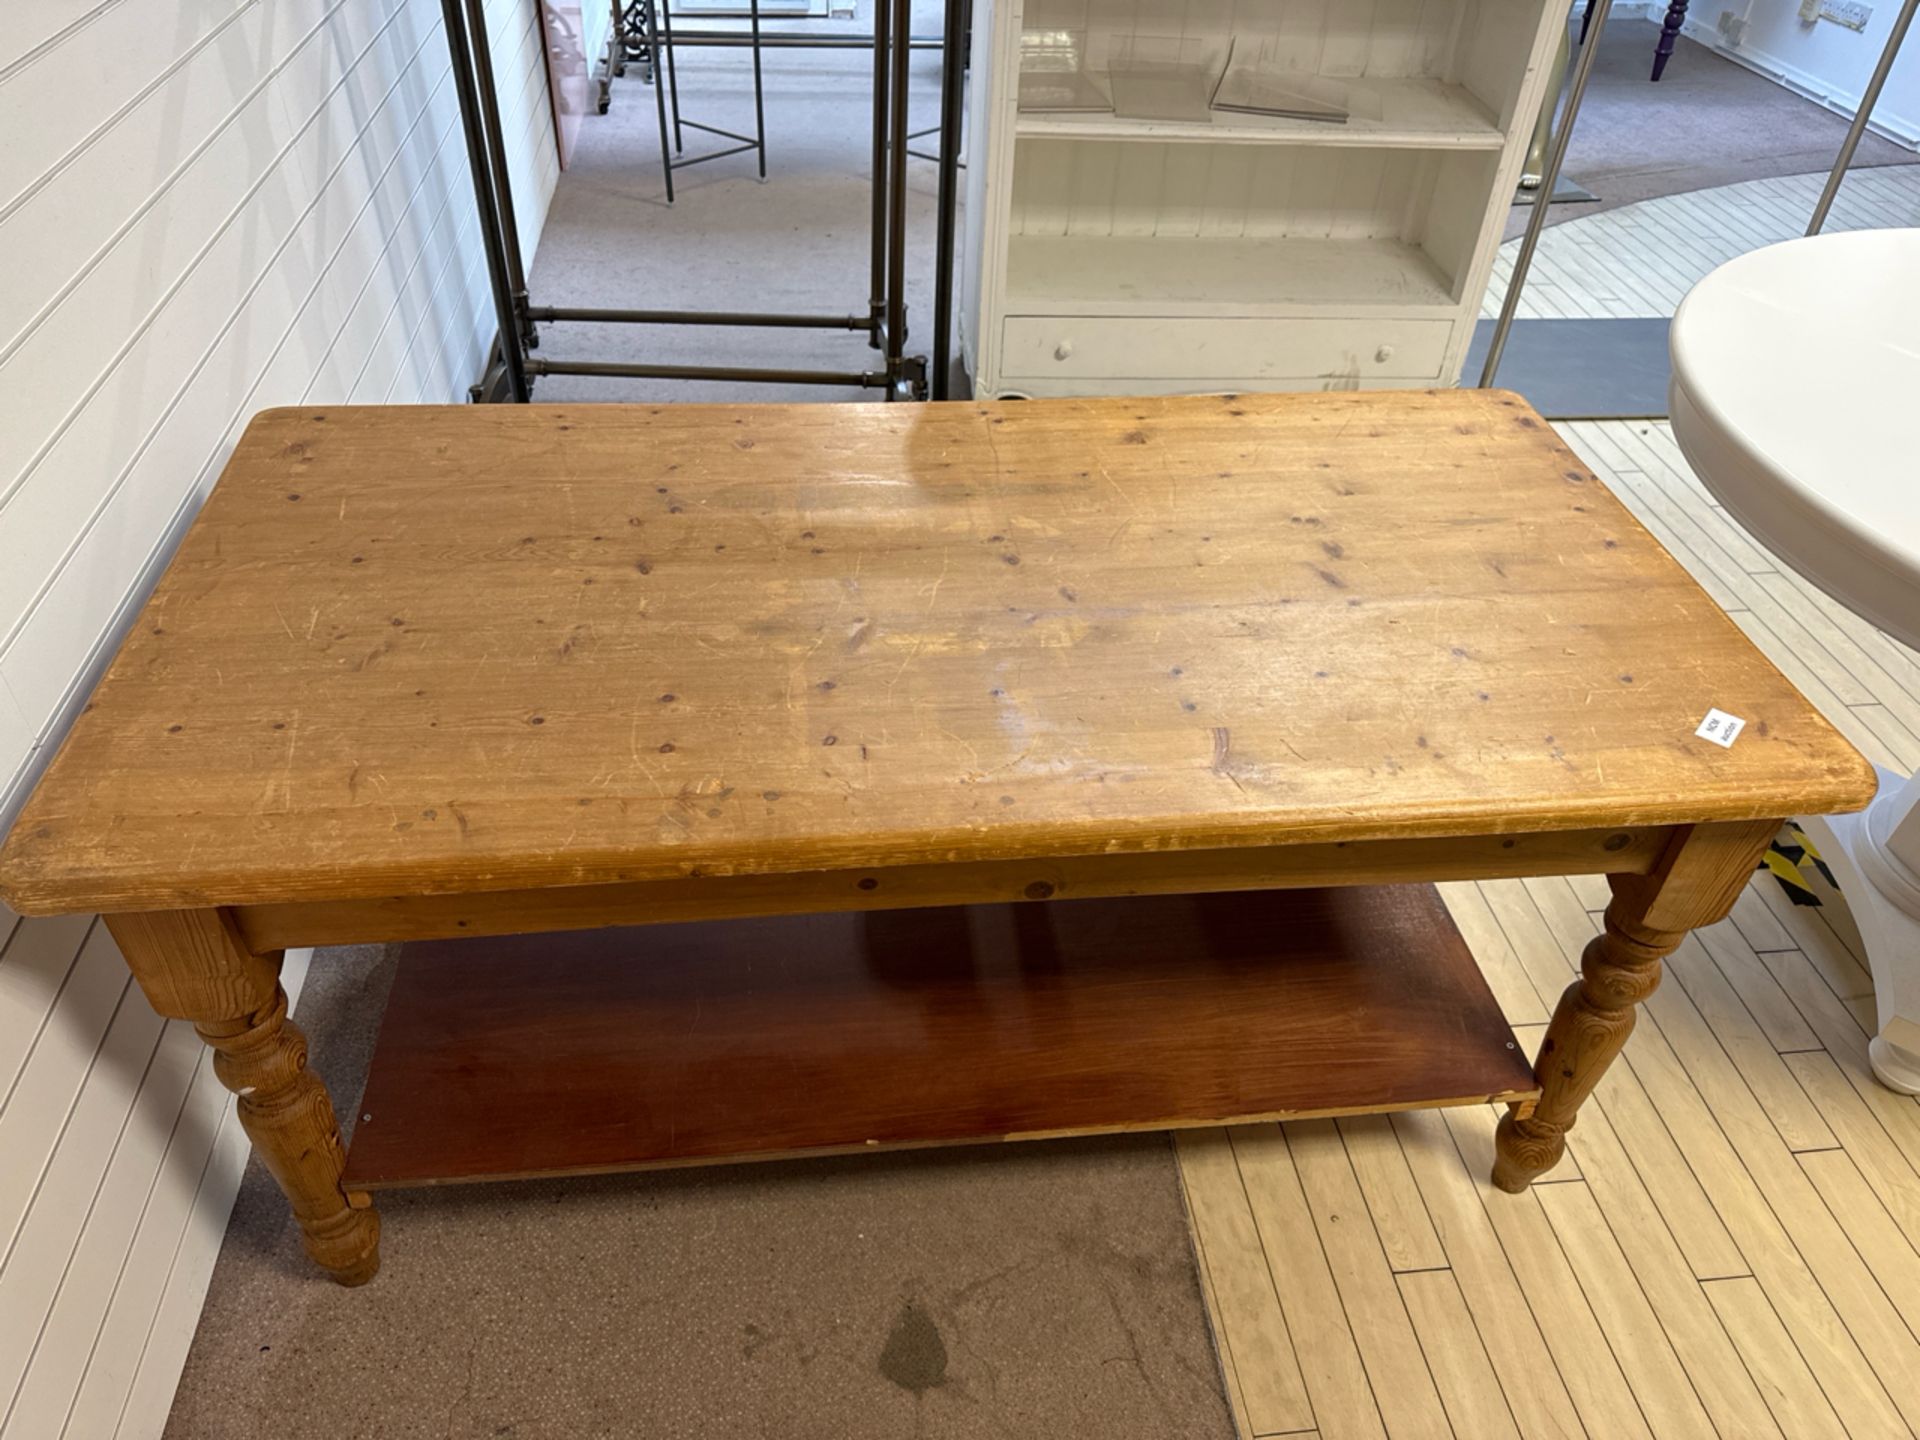 Wooden Table With Shelf - Image 3 of 5